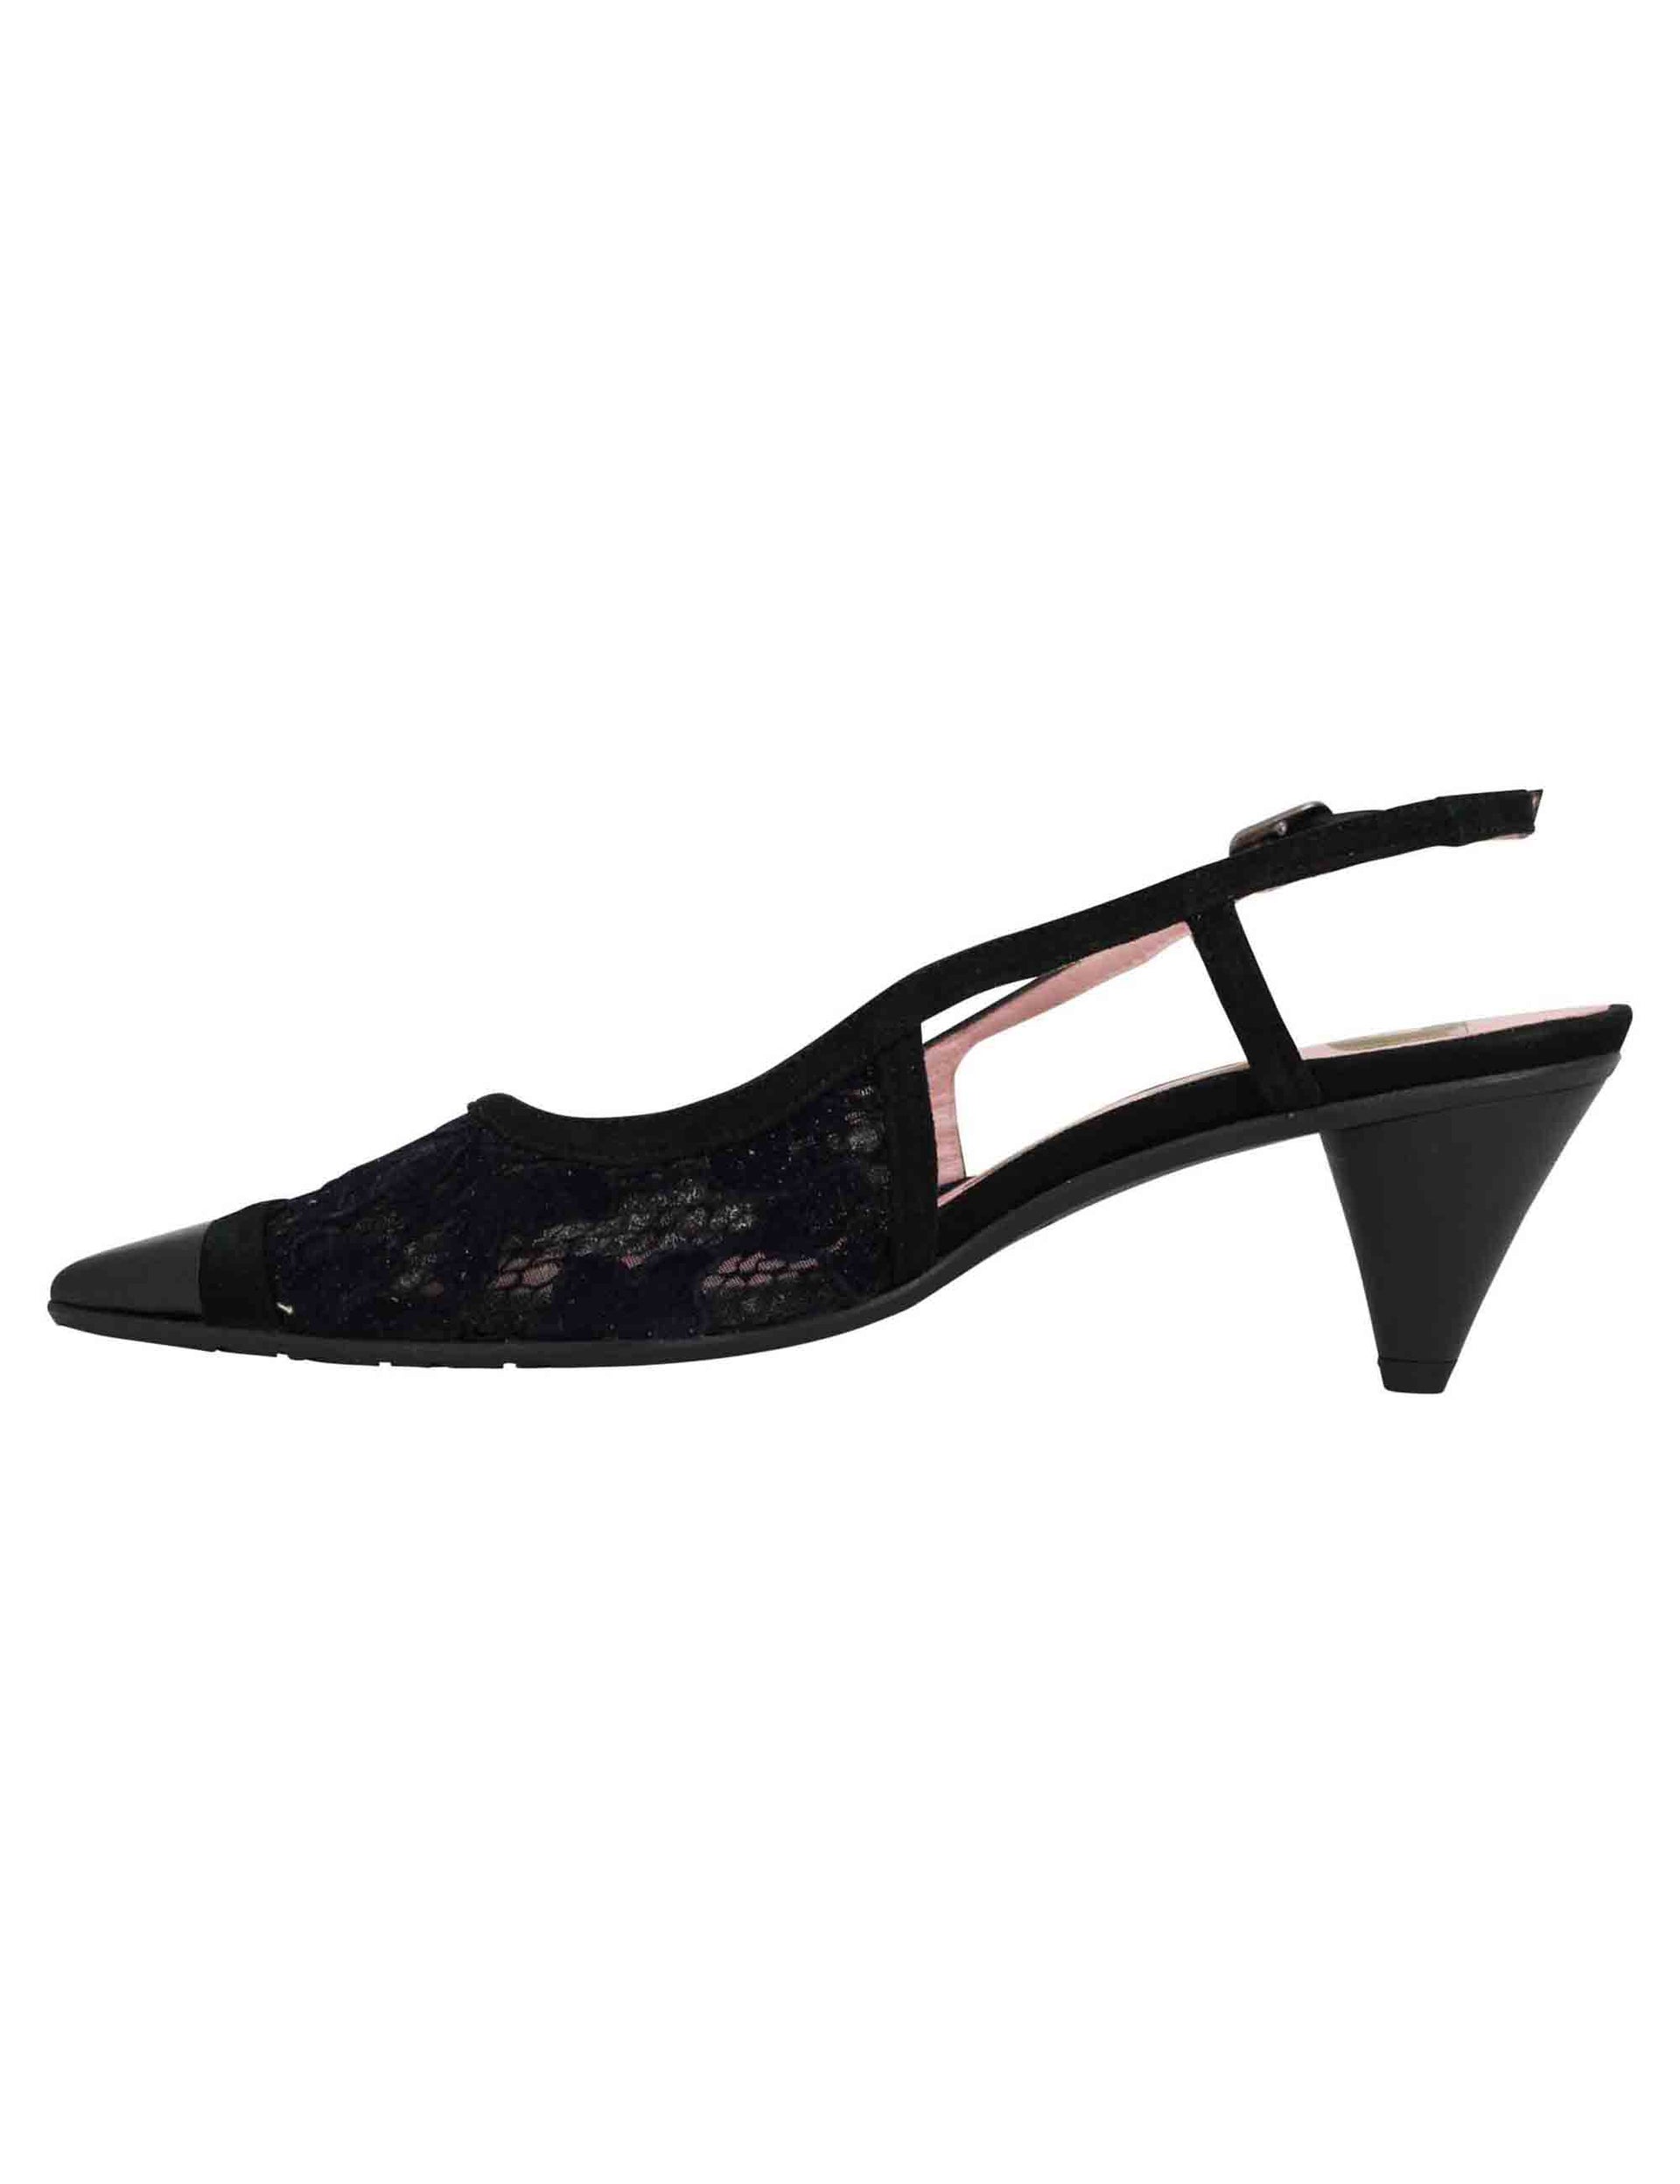 Women's black lace slingback pumps with pointed toe